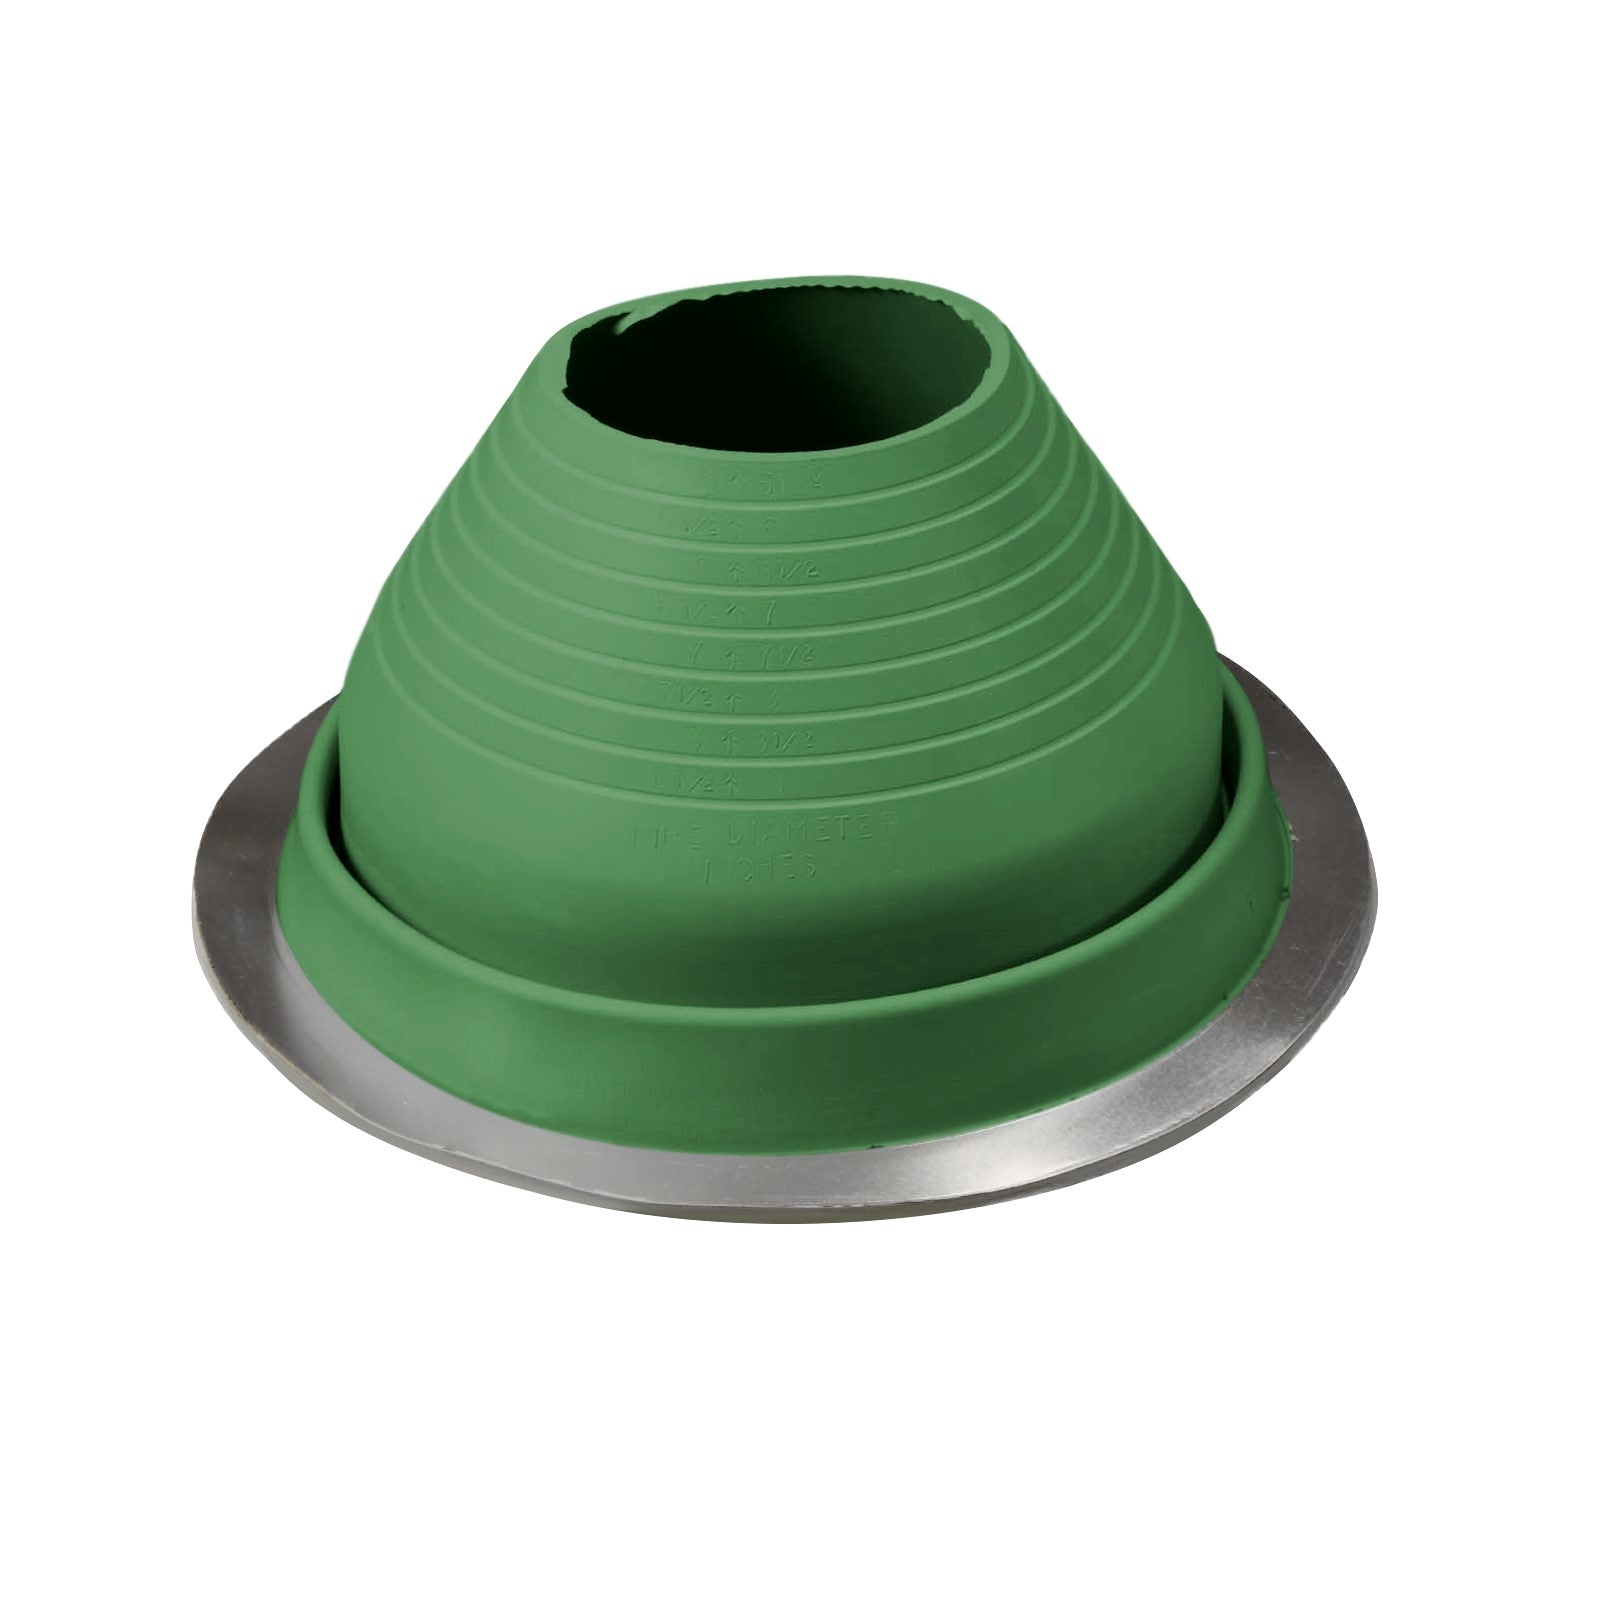 #6 Roofjack Round EPDM Pipe Flashing Boot Light Green